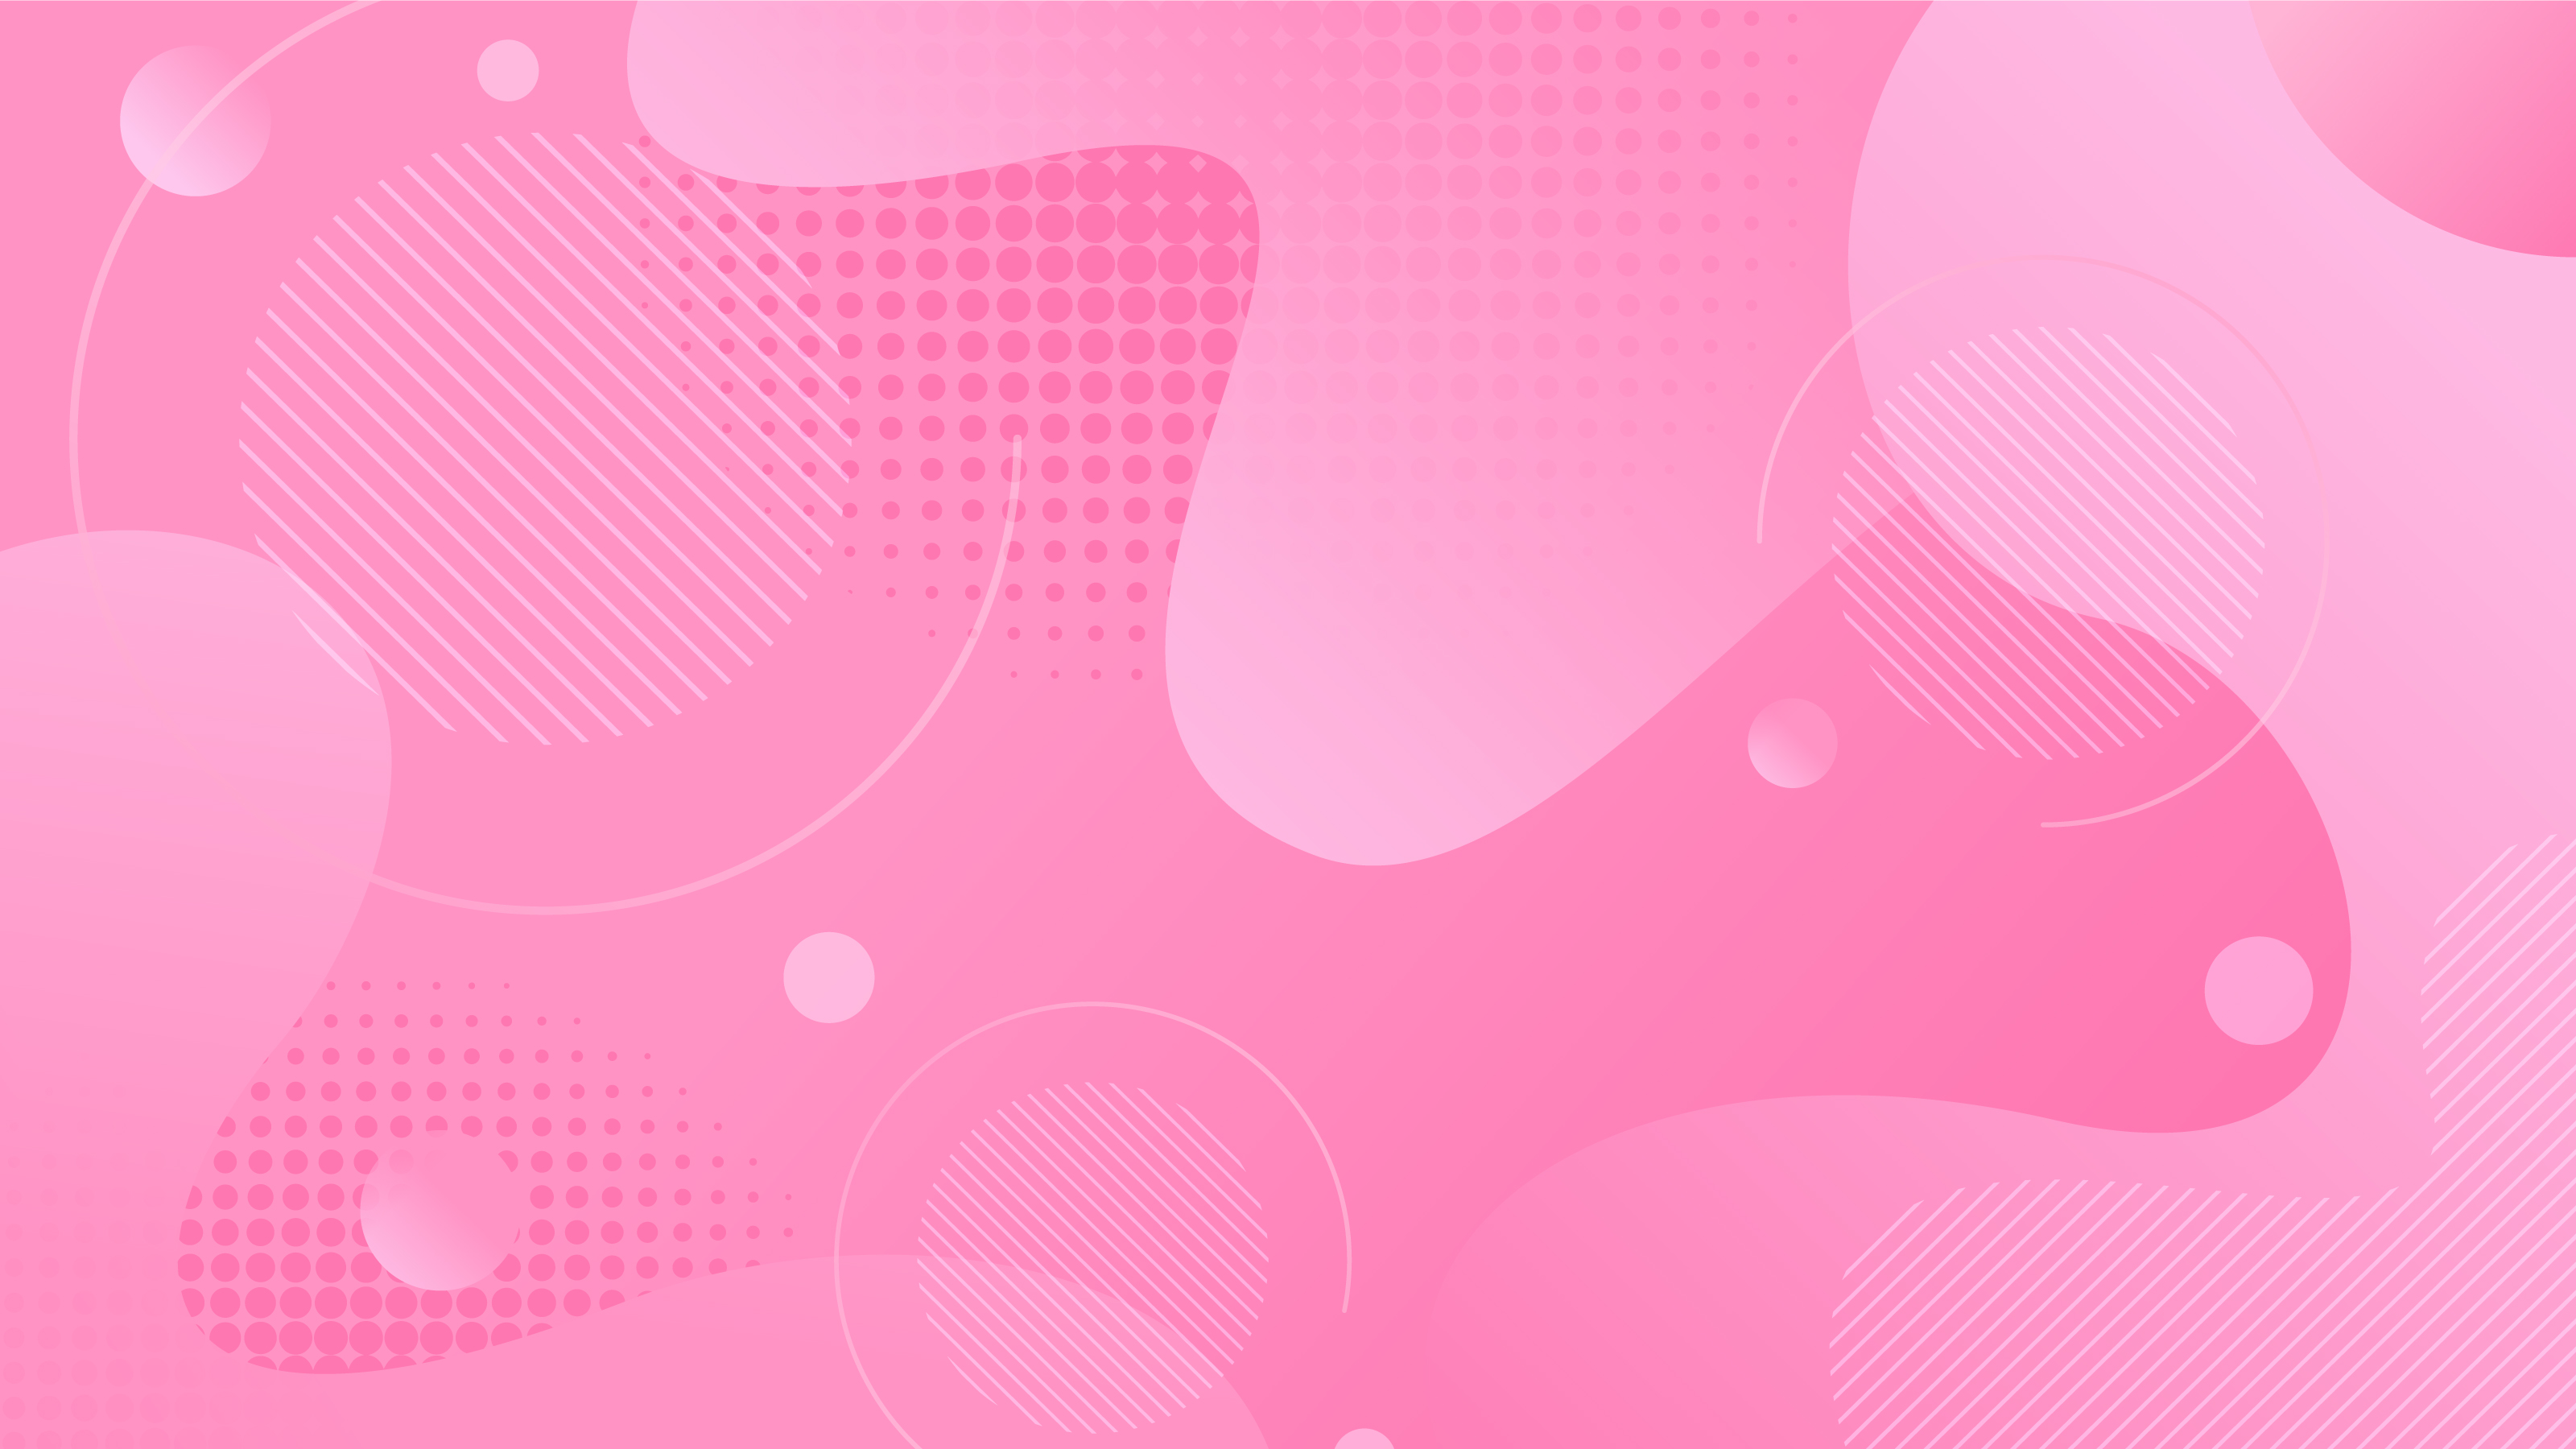 Details 100 abstract background pink